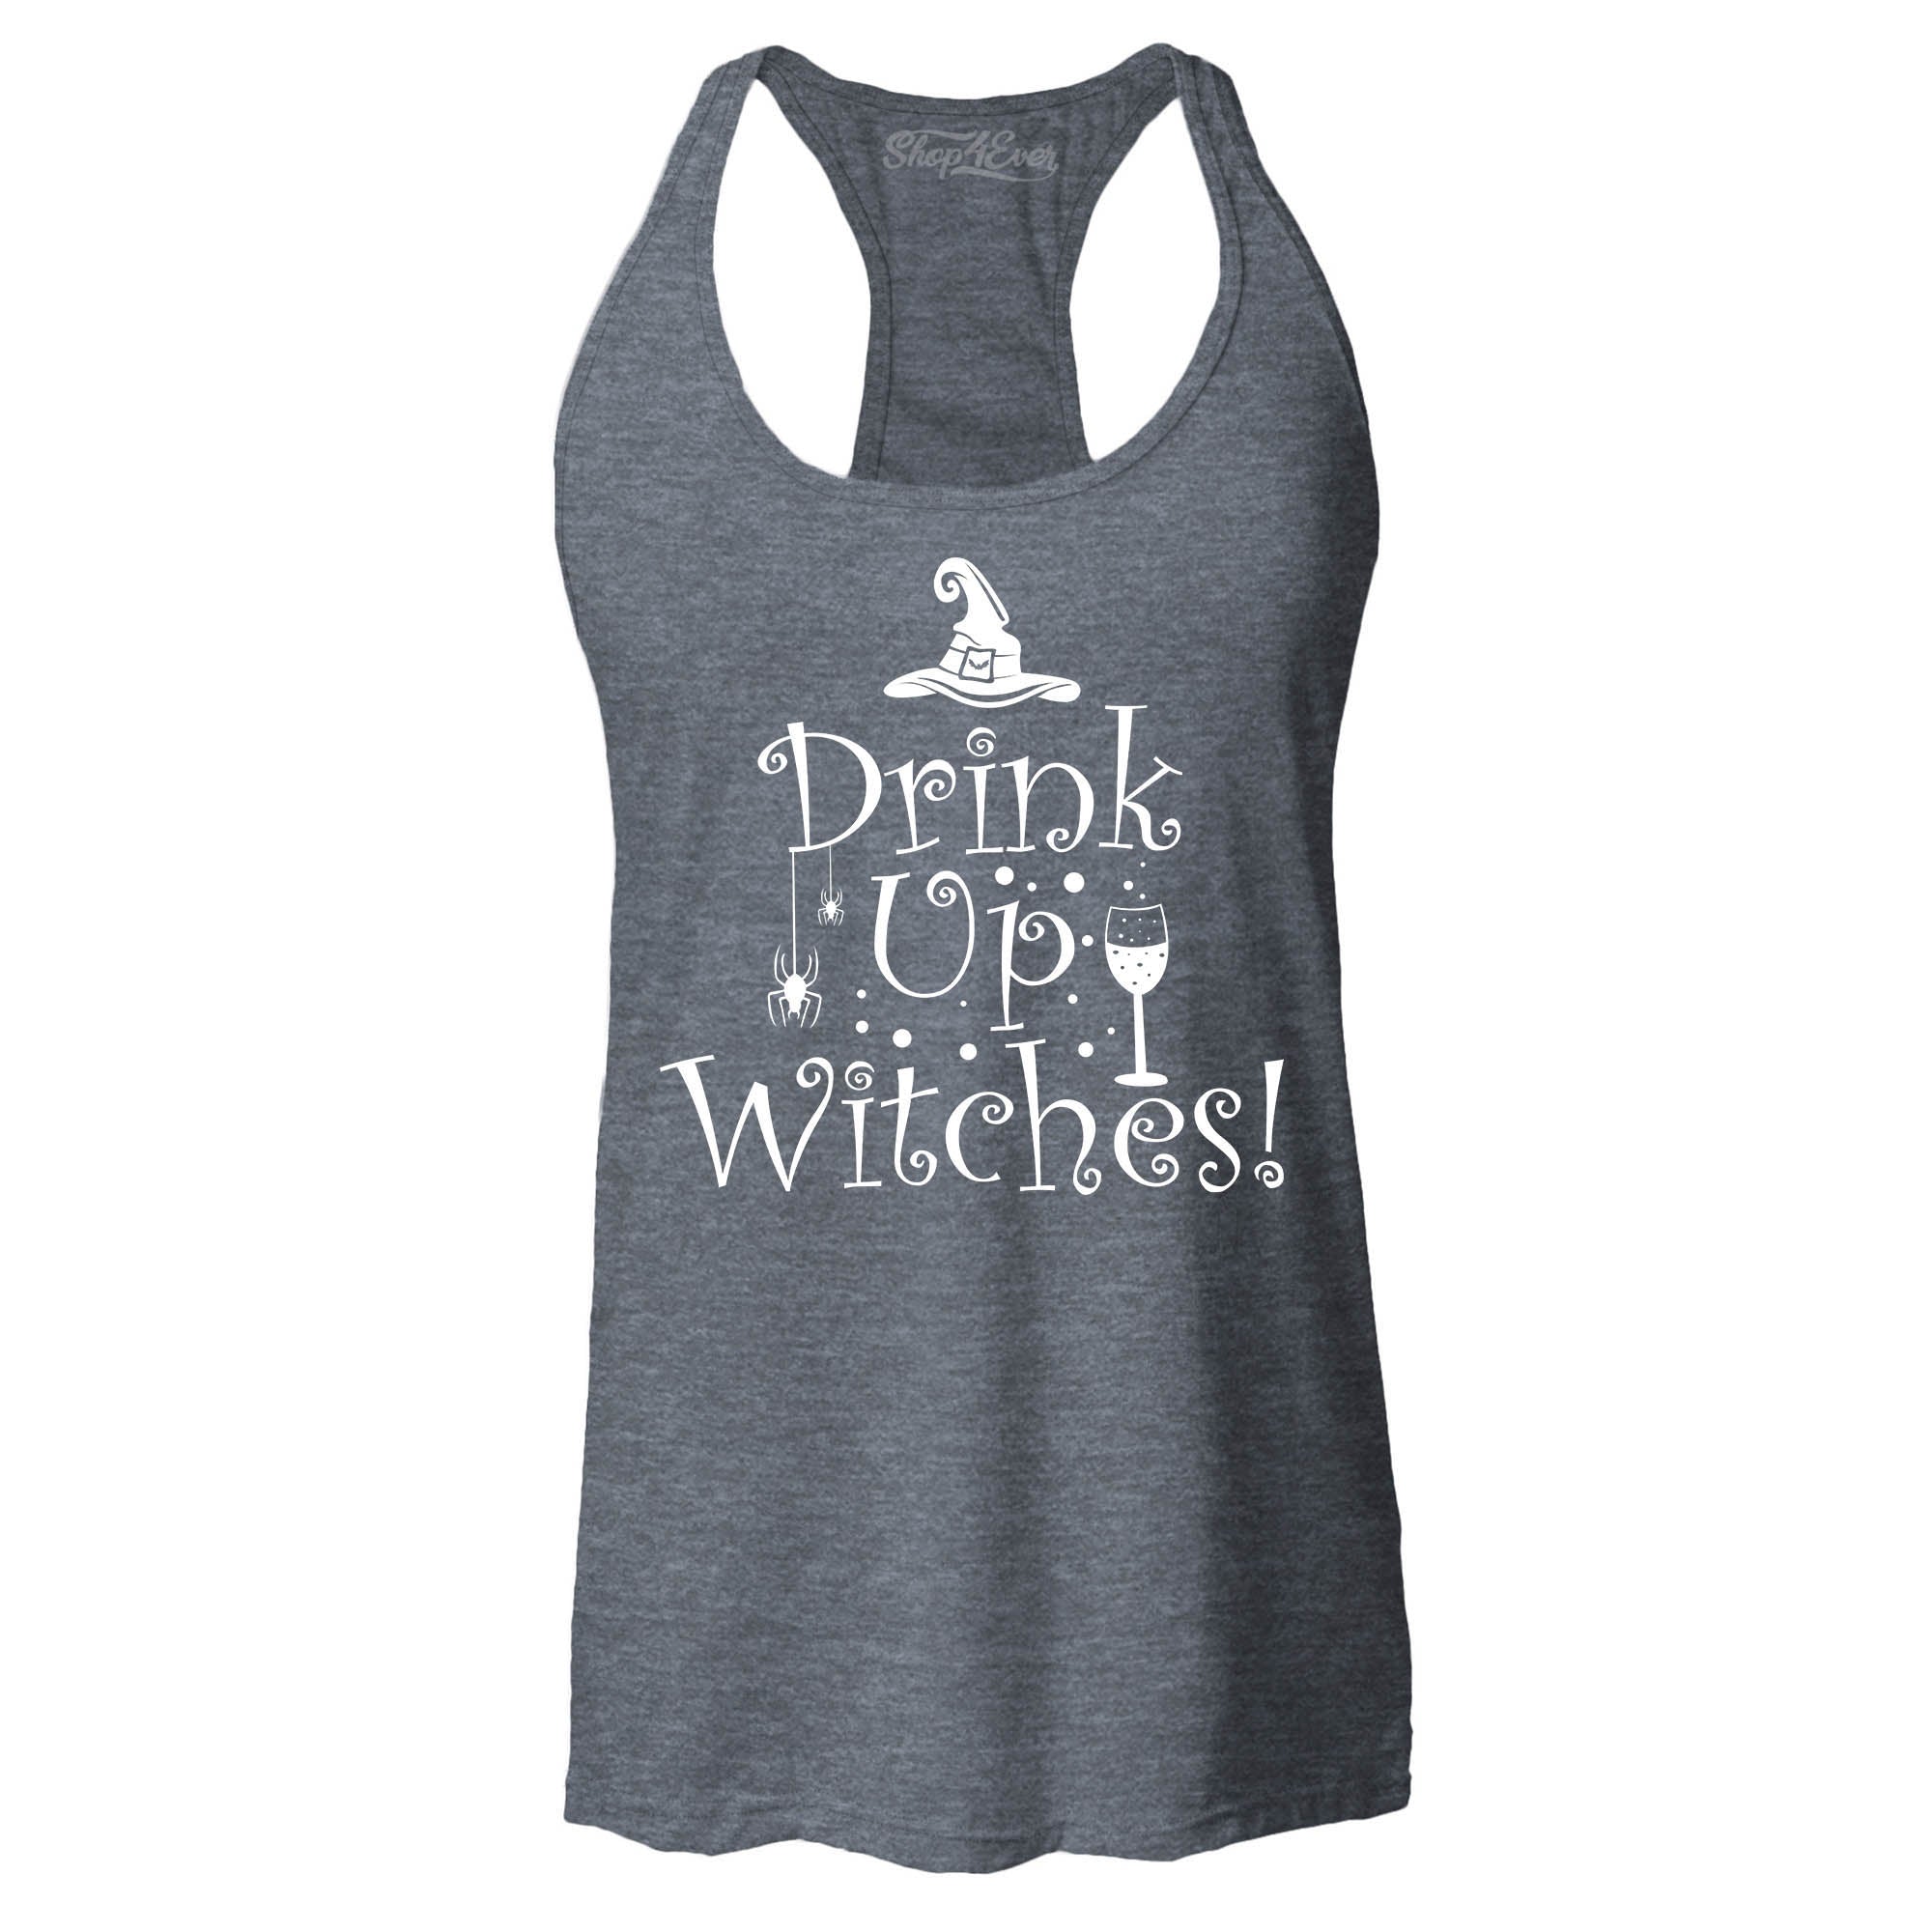 Drink Up Witches Women's Racerback Tank Top Slim Fit